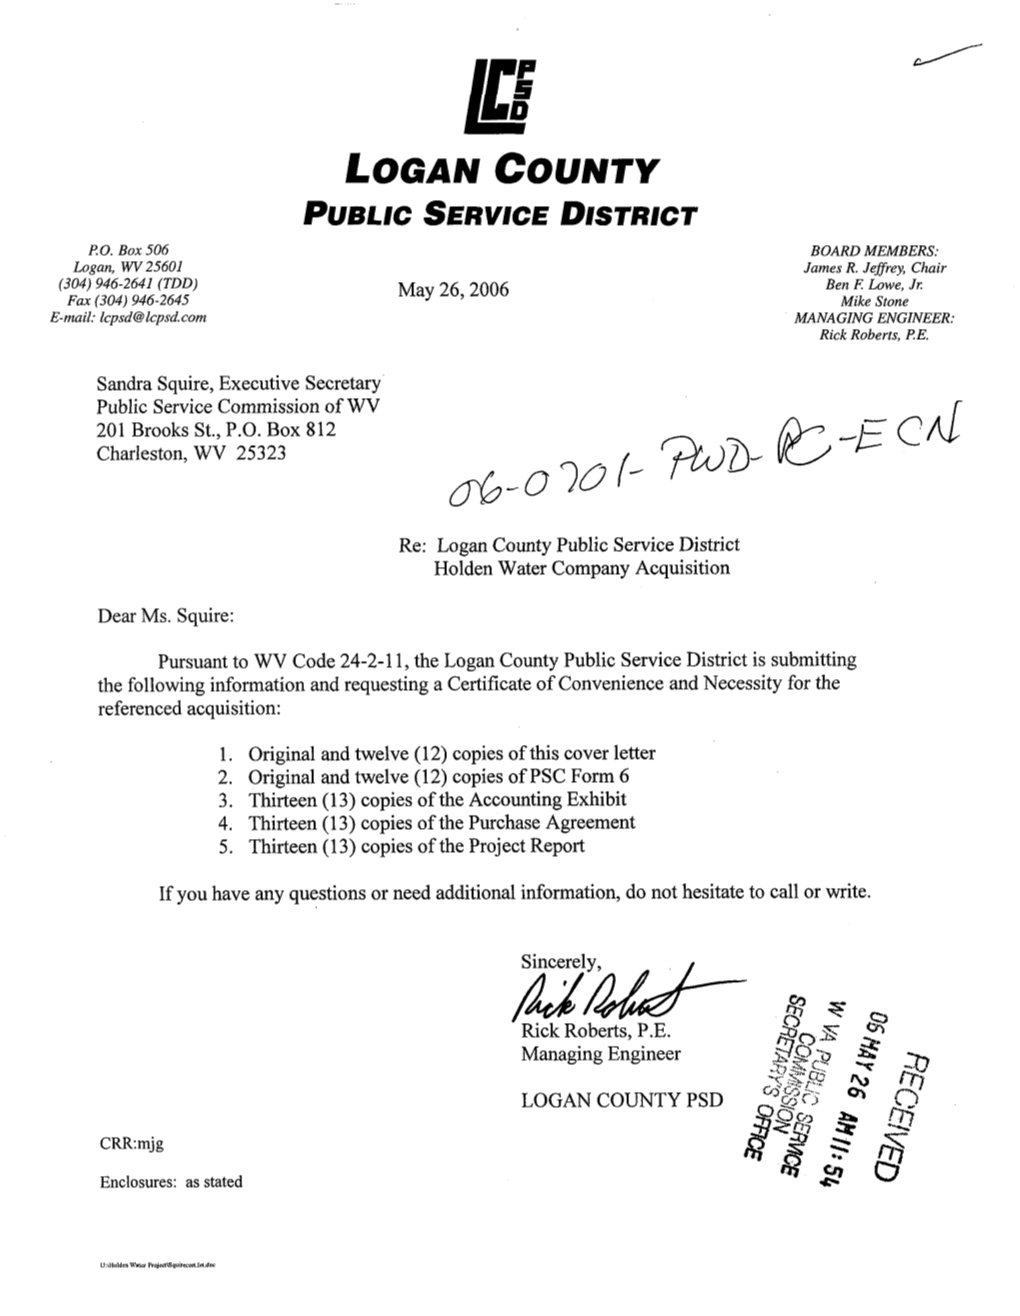 Logan County Public Service District Holden Water Company Acquisition